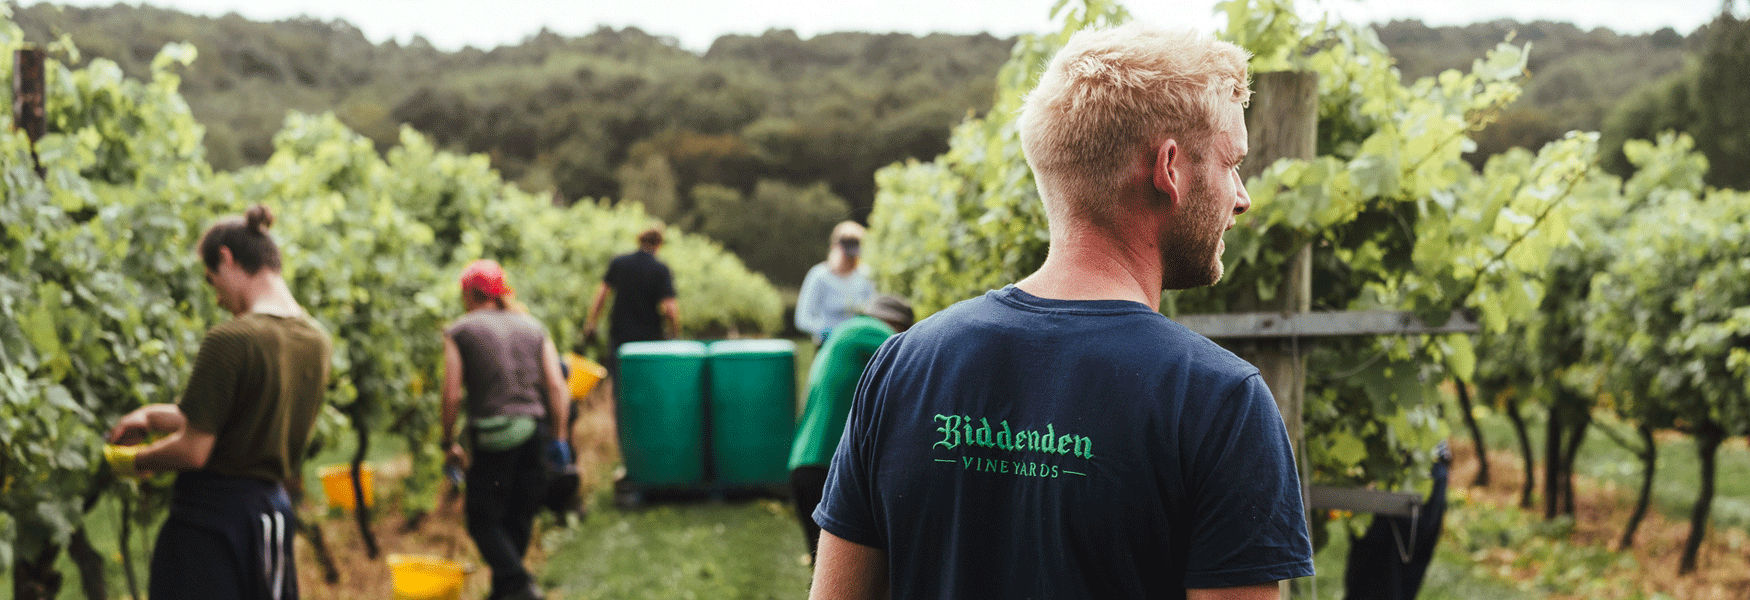 September is the Grape Harvest at Biddenden Vineyards and indeed at all the vineyards across Kent.  It is a time of anticipation and excitement as the wine making process starts.